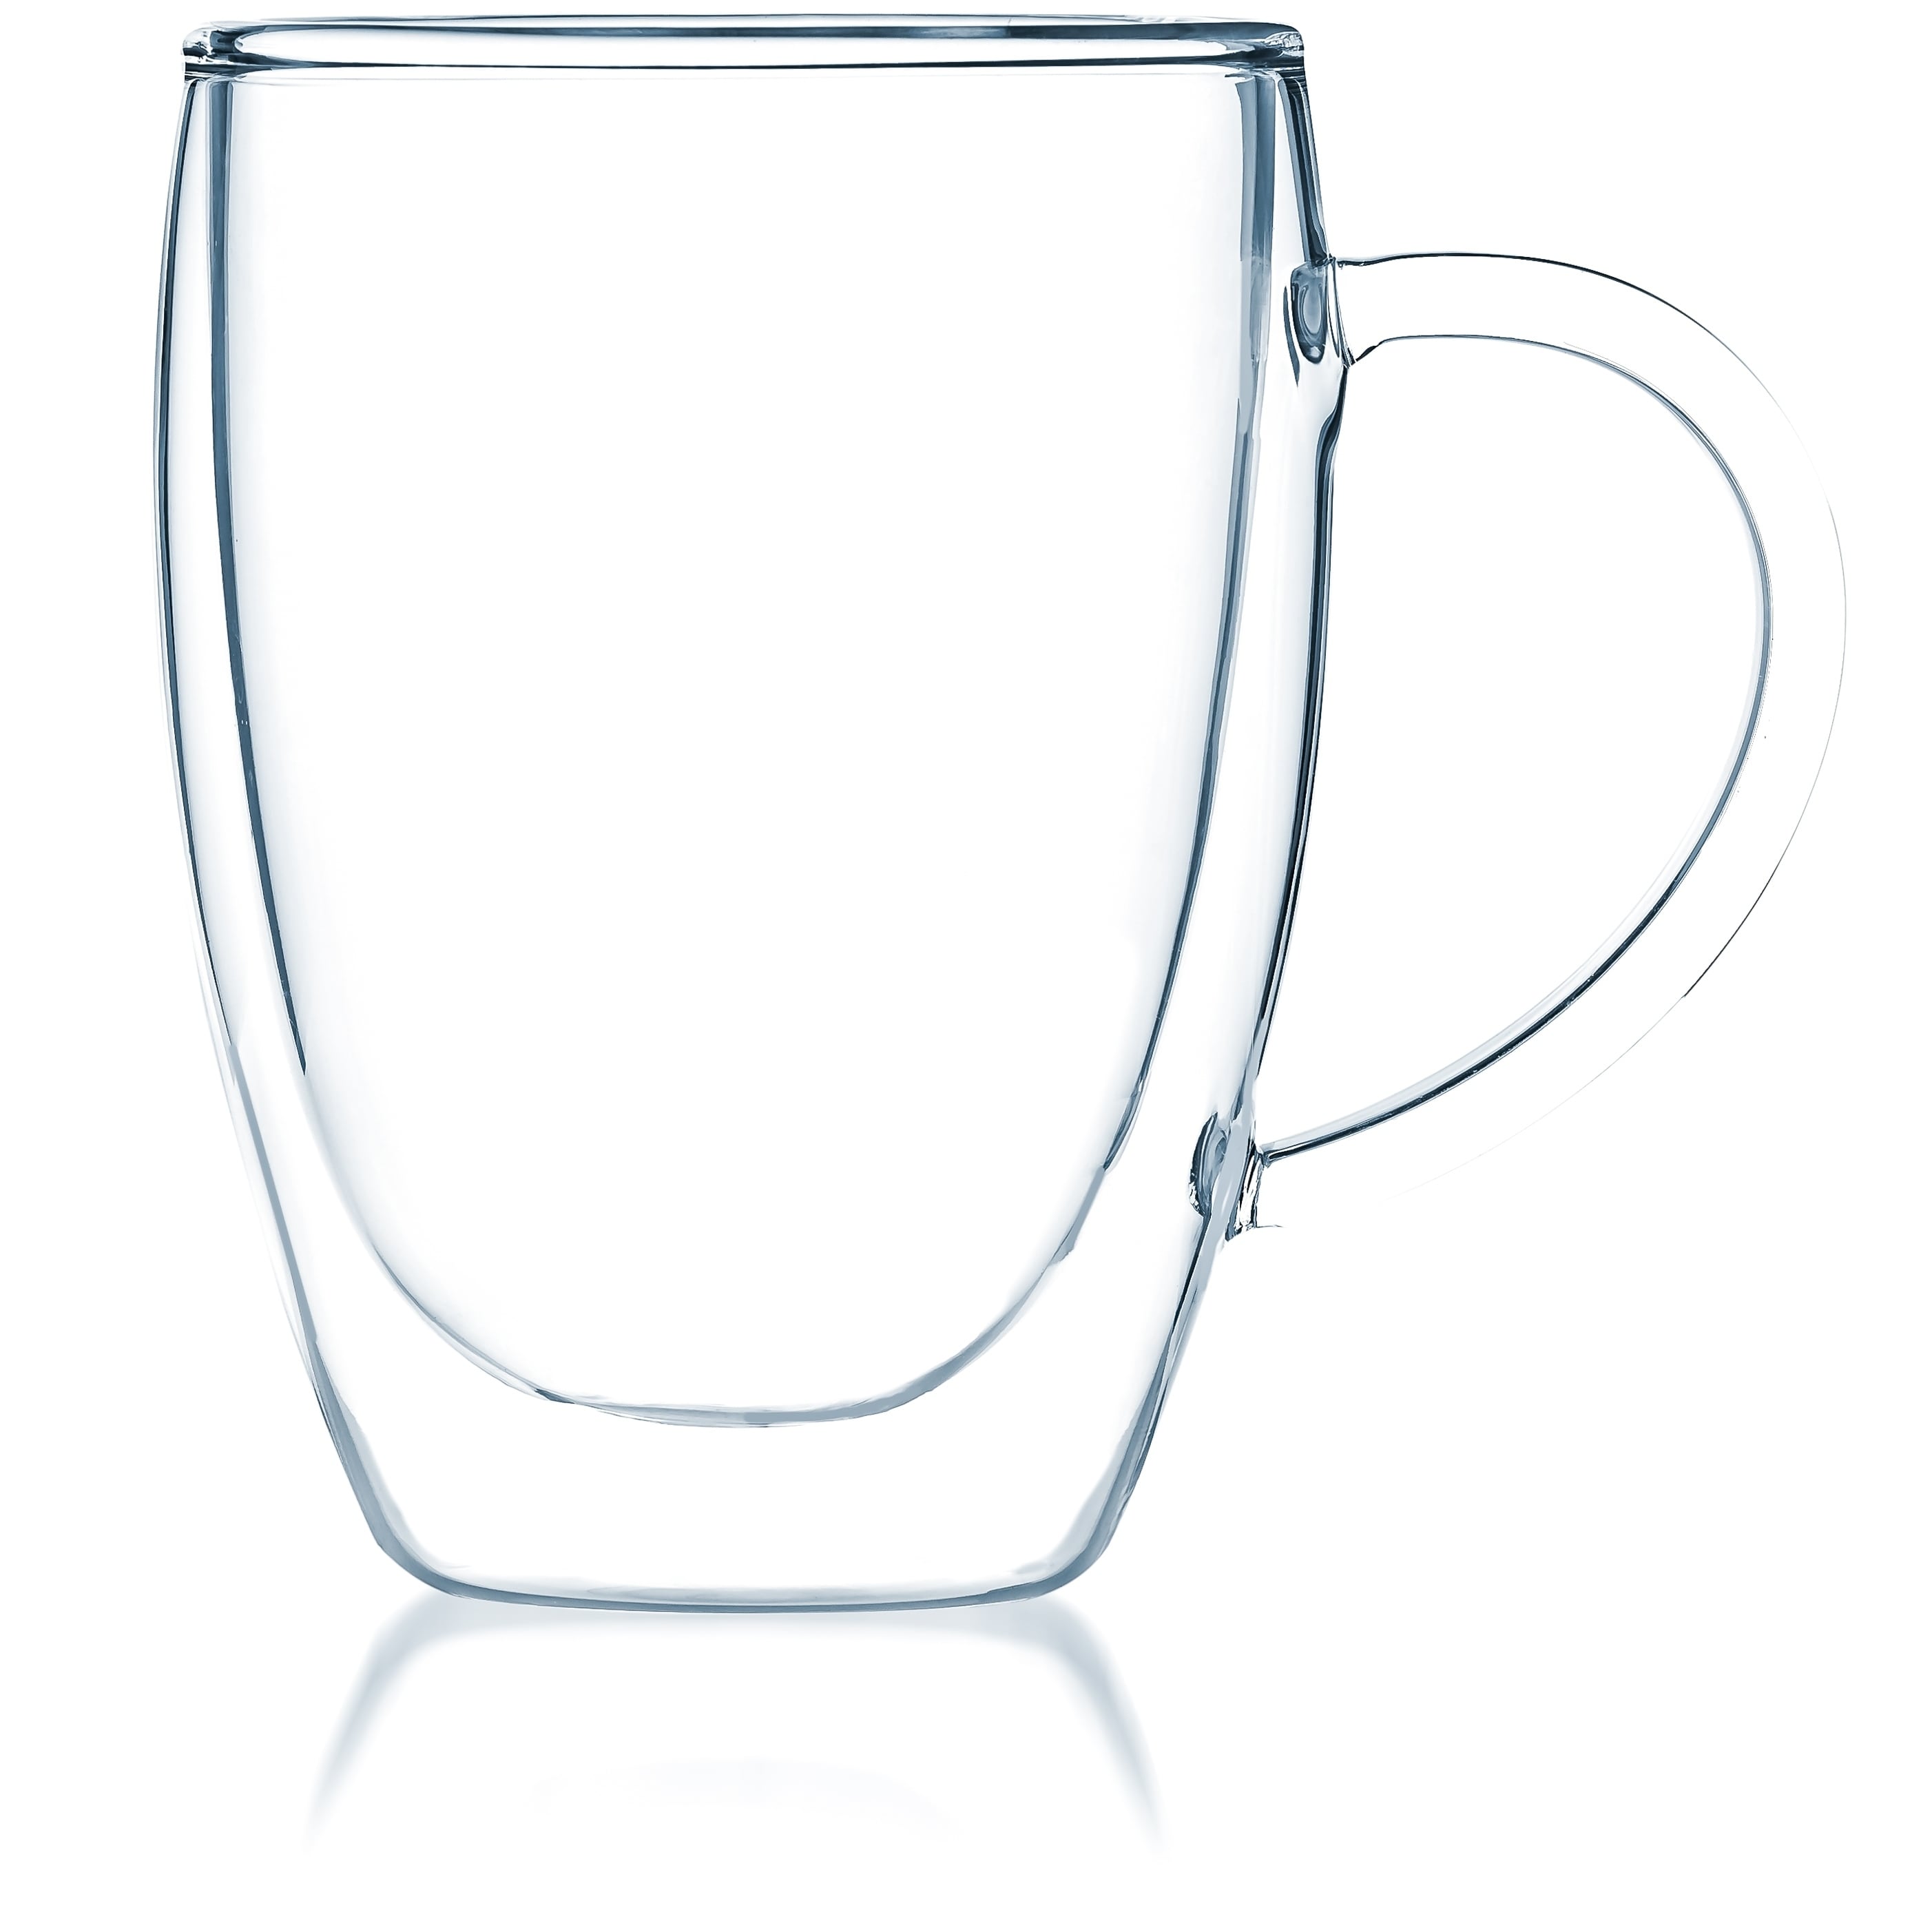 https://ak1.ostkcdn.com/images/products/14427905/JavaFly-Clear-Glass-12-ounce-Double-walled-Thermo-Bistro-Mug-with-Handle-Set-of-2-81bda7f8-851f-46dd-9fdc-8407afcb2591.jpg